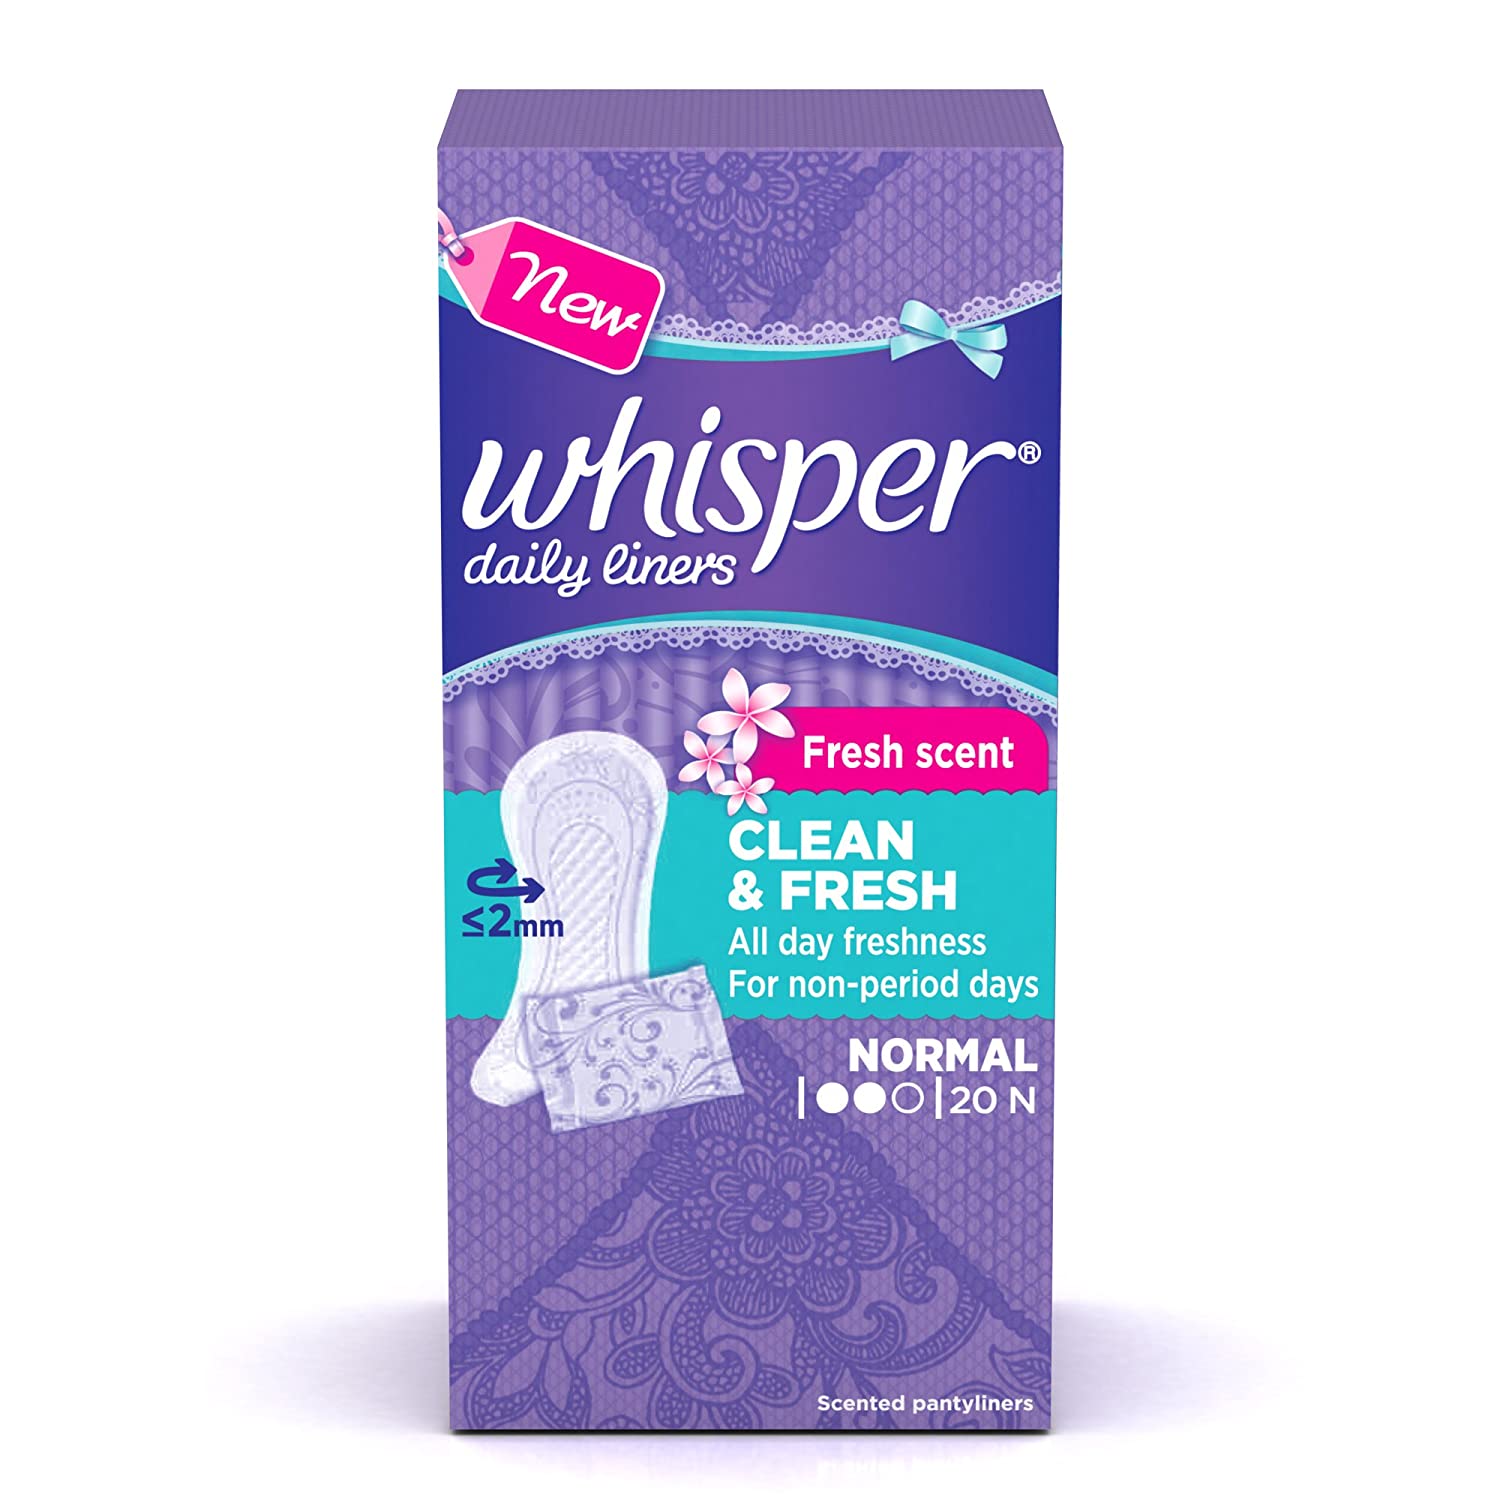 Whisper Daily Liners - Clean & Fresh 20s Pack